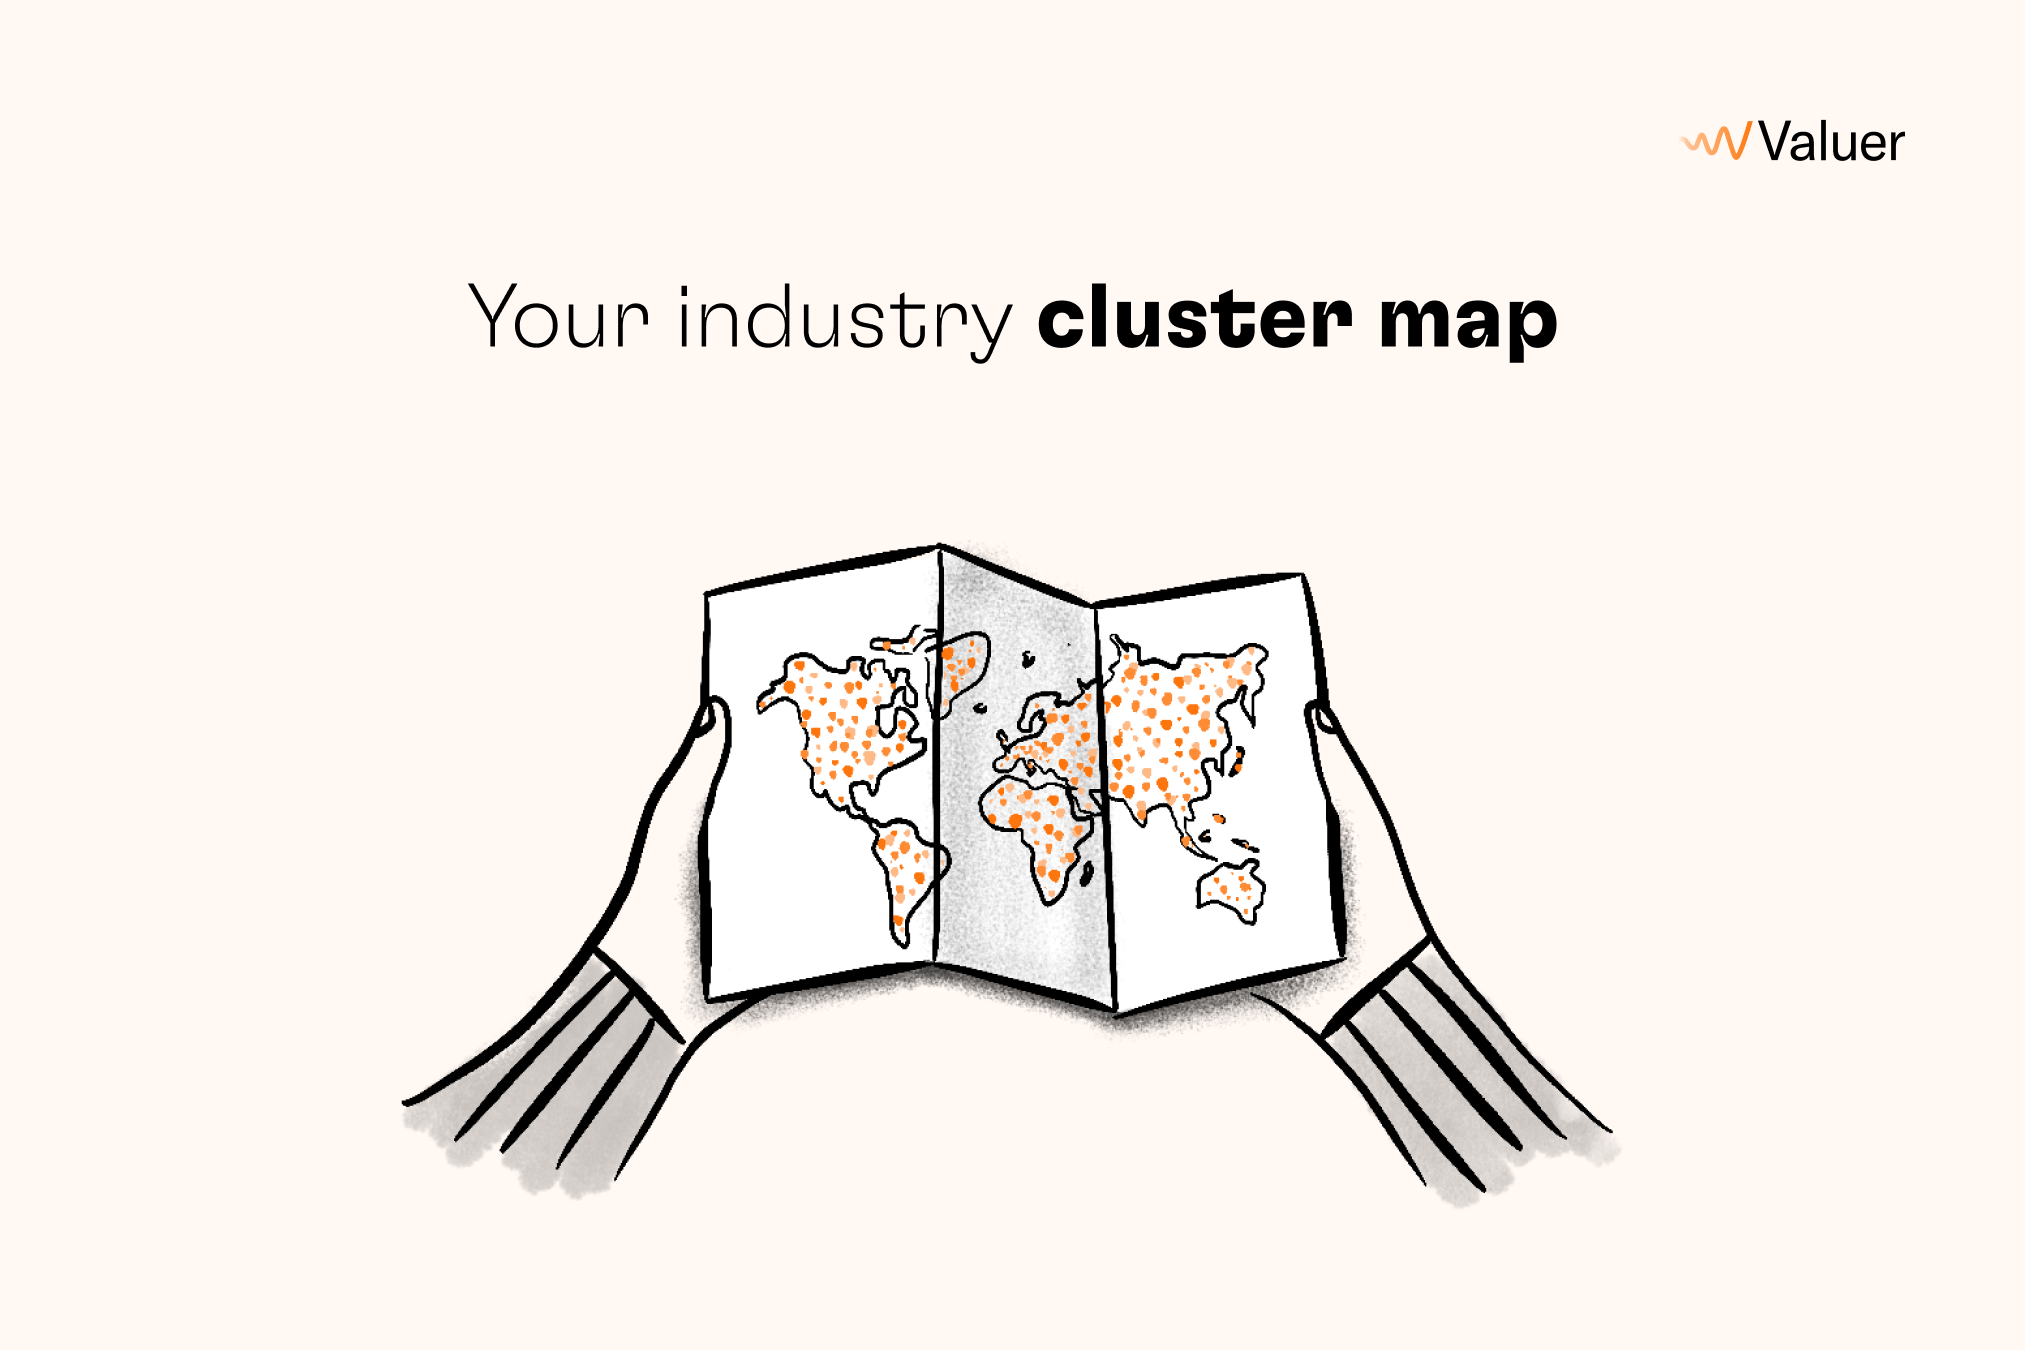 Your industry cluster map